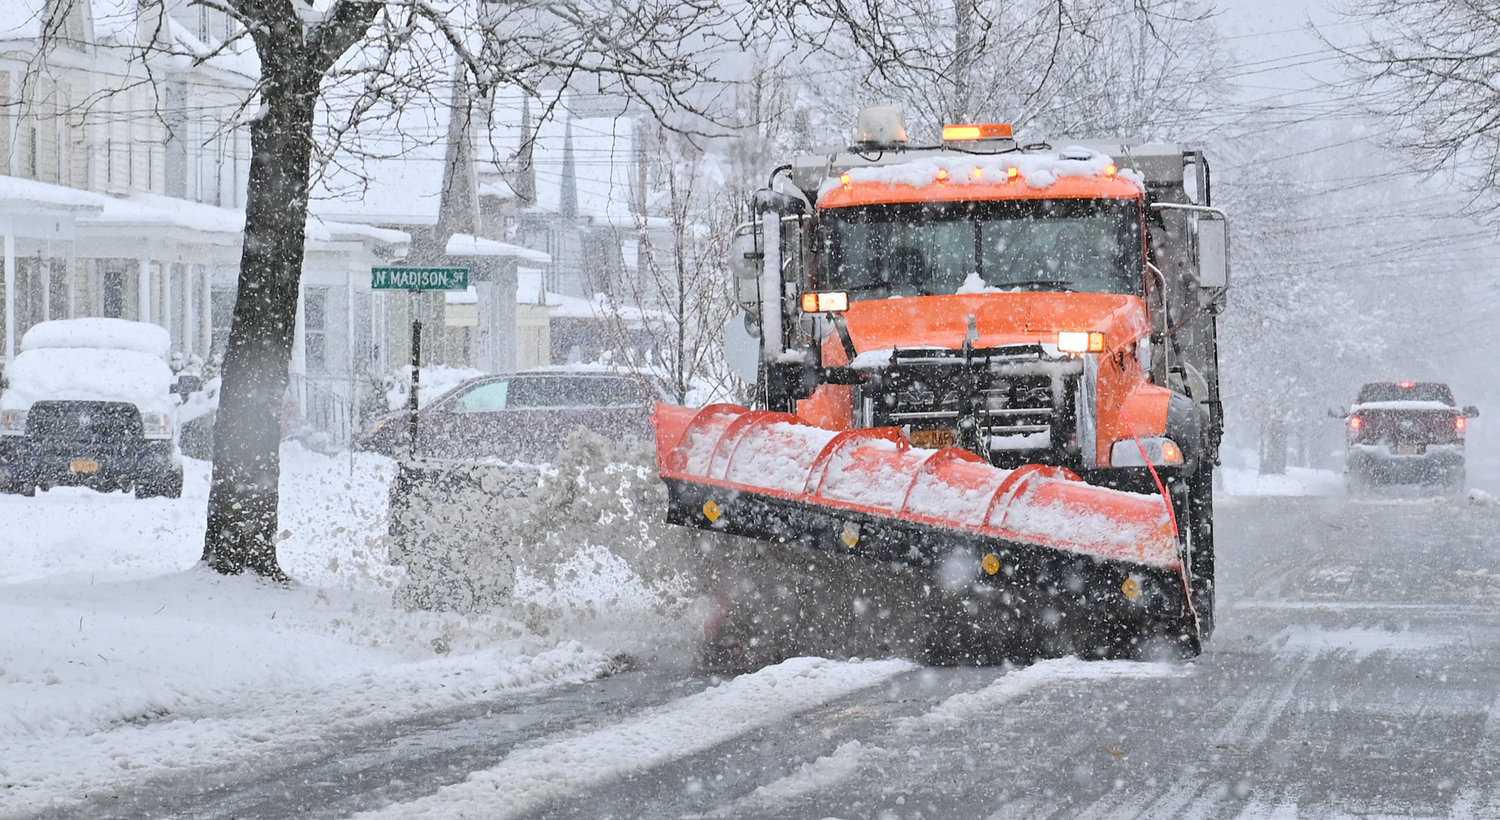 City plow on Bloomfield St. moving the heavy wet snow